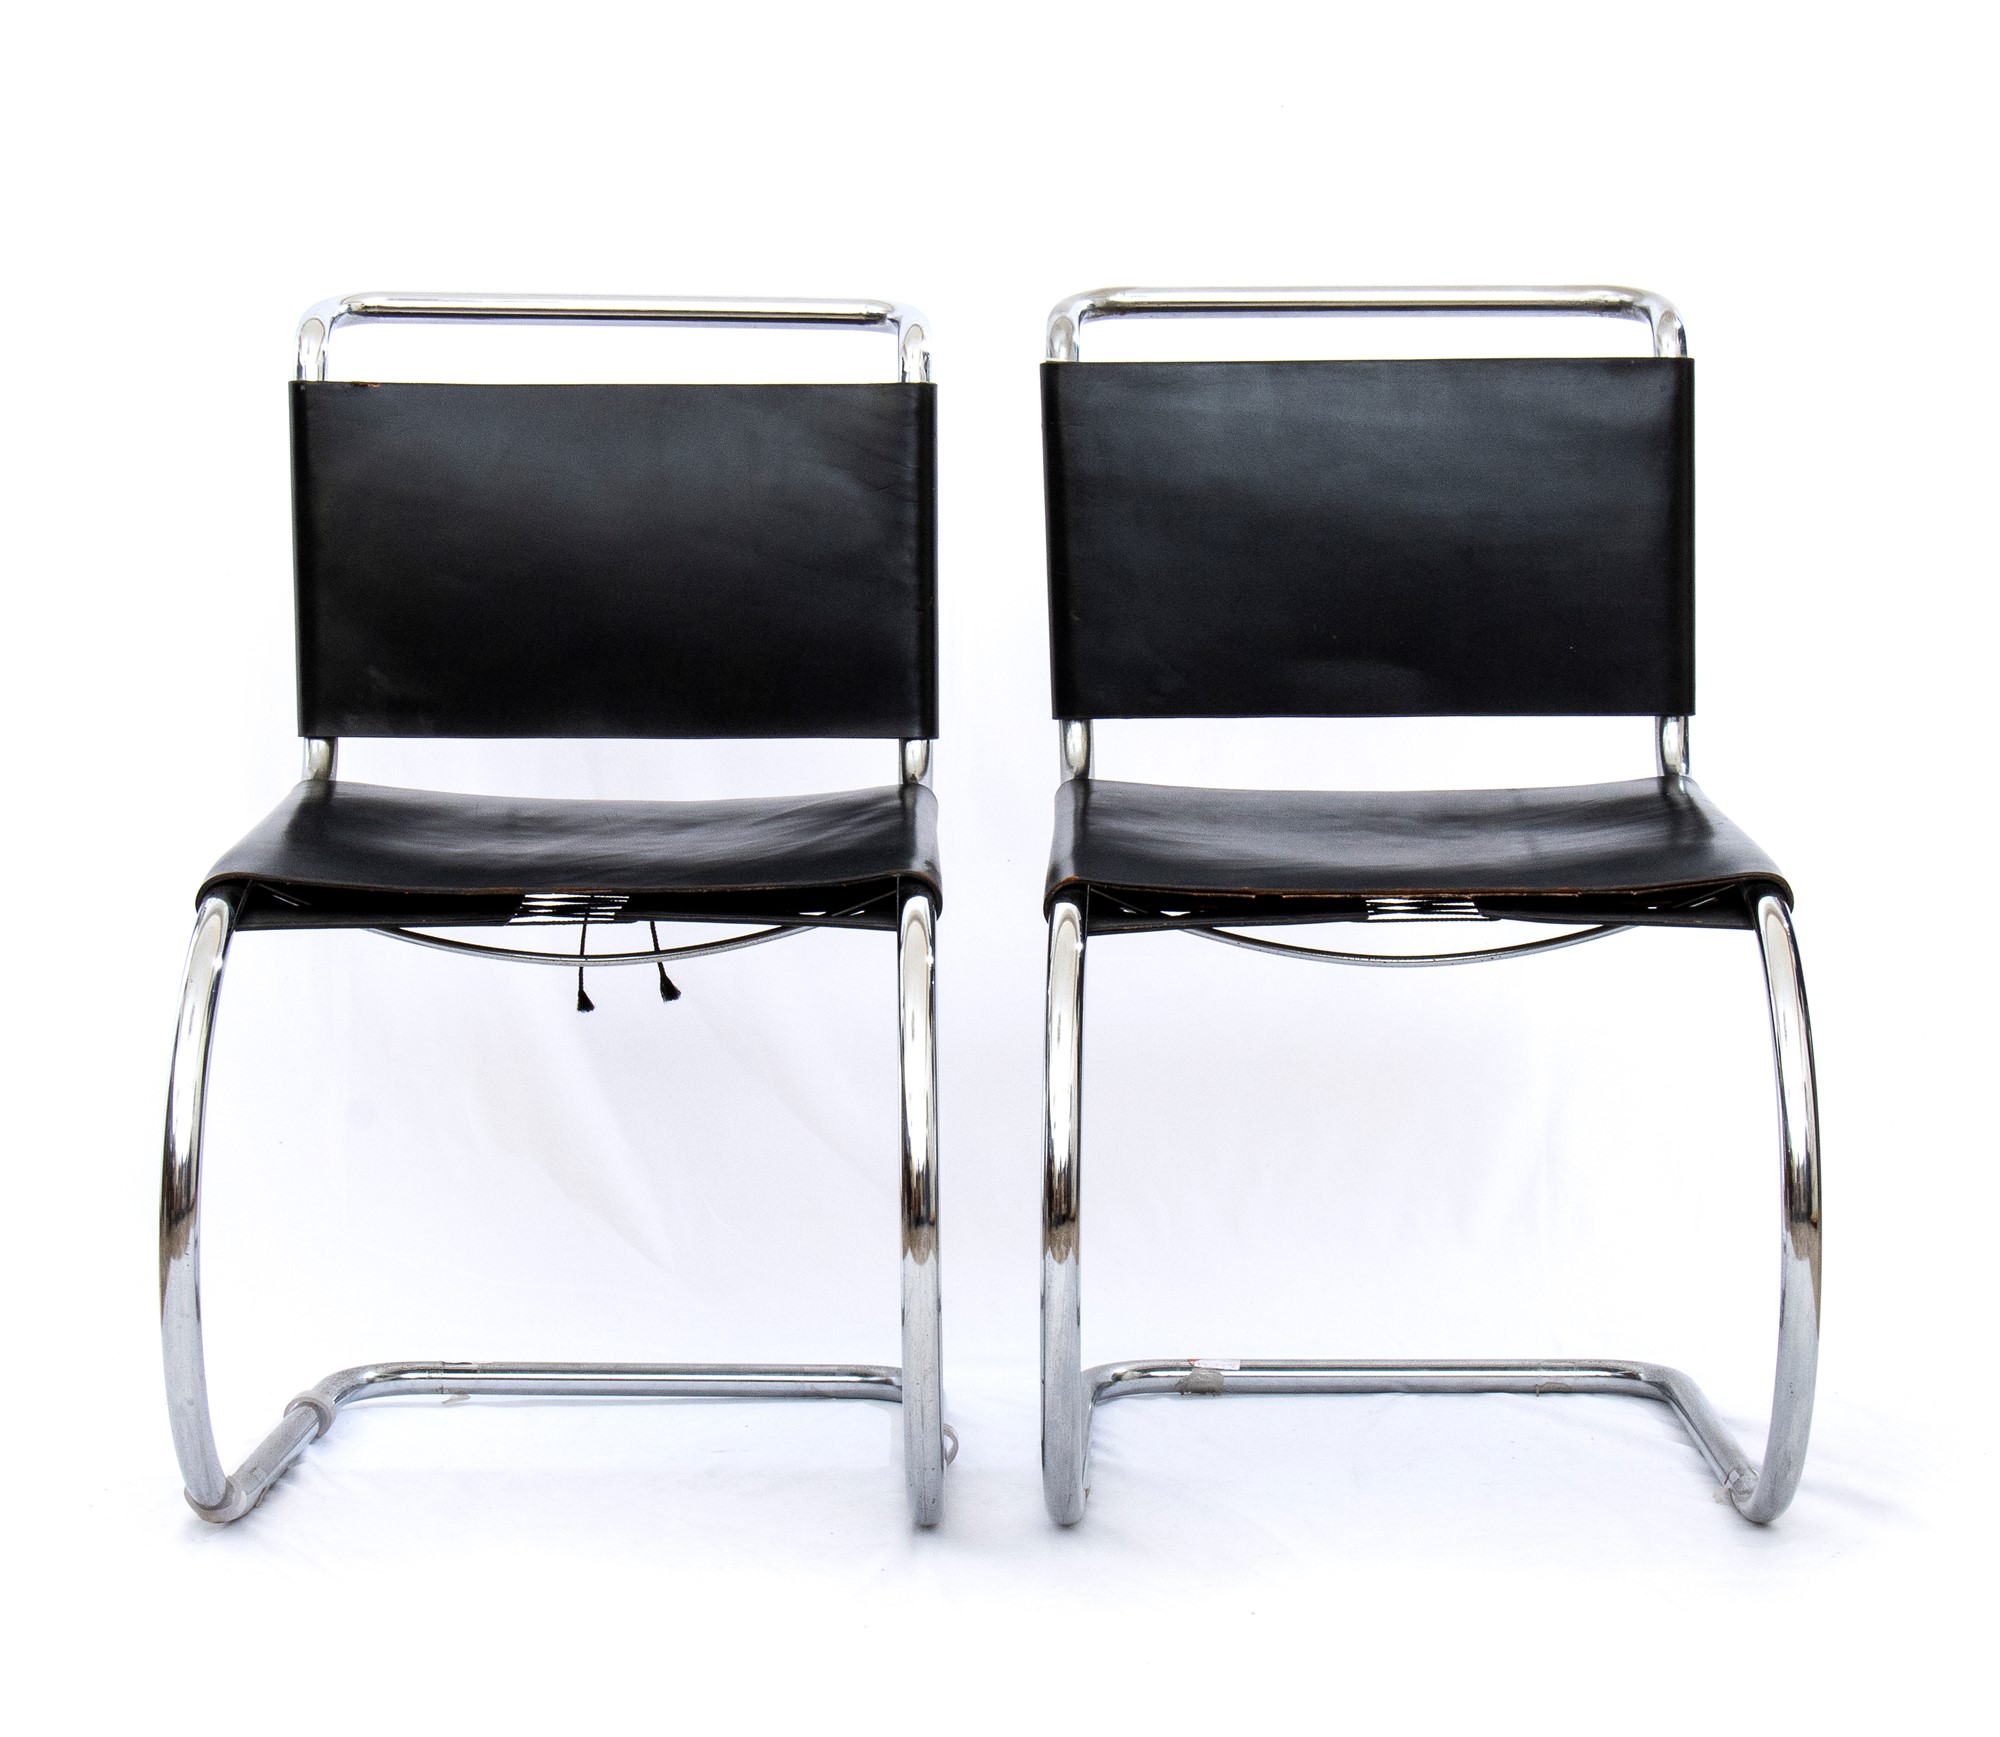 2 chairs in black leather and steel designed by Mart Stam and Marcer Beuer - Image 6 of 19